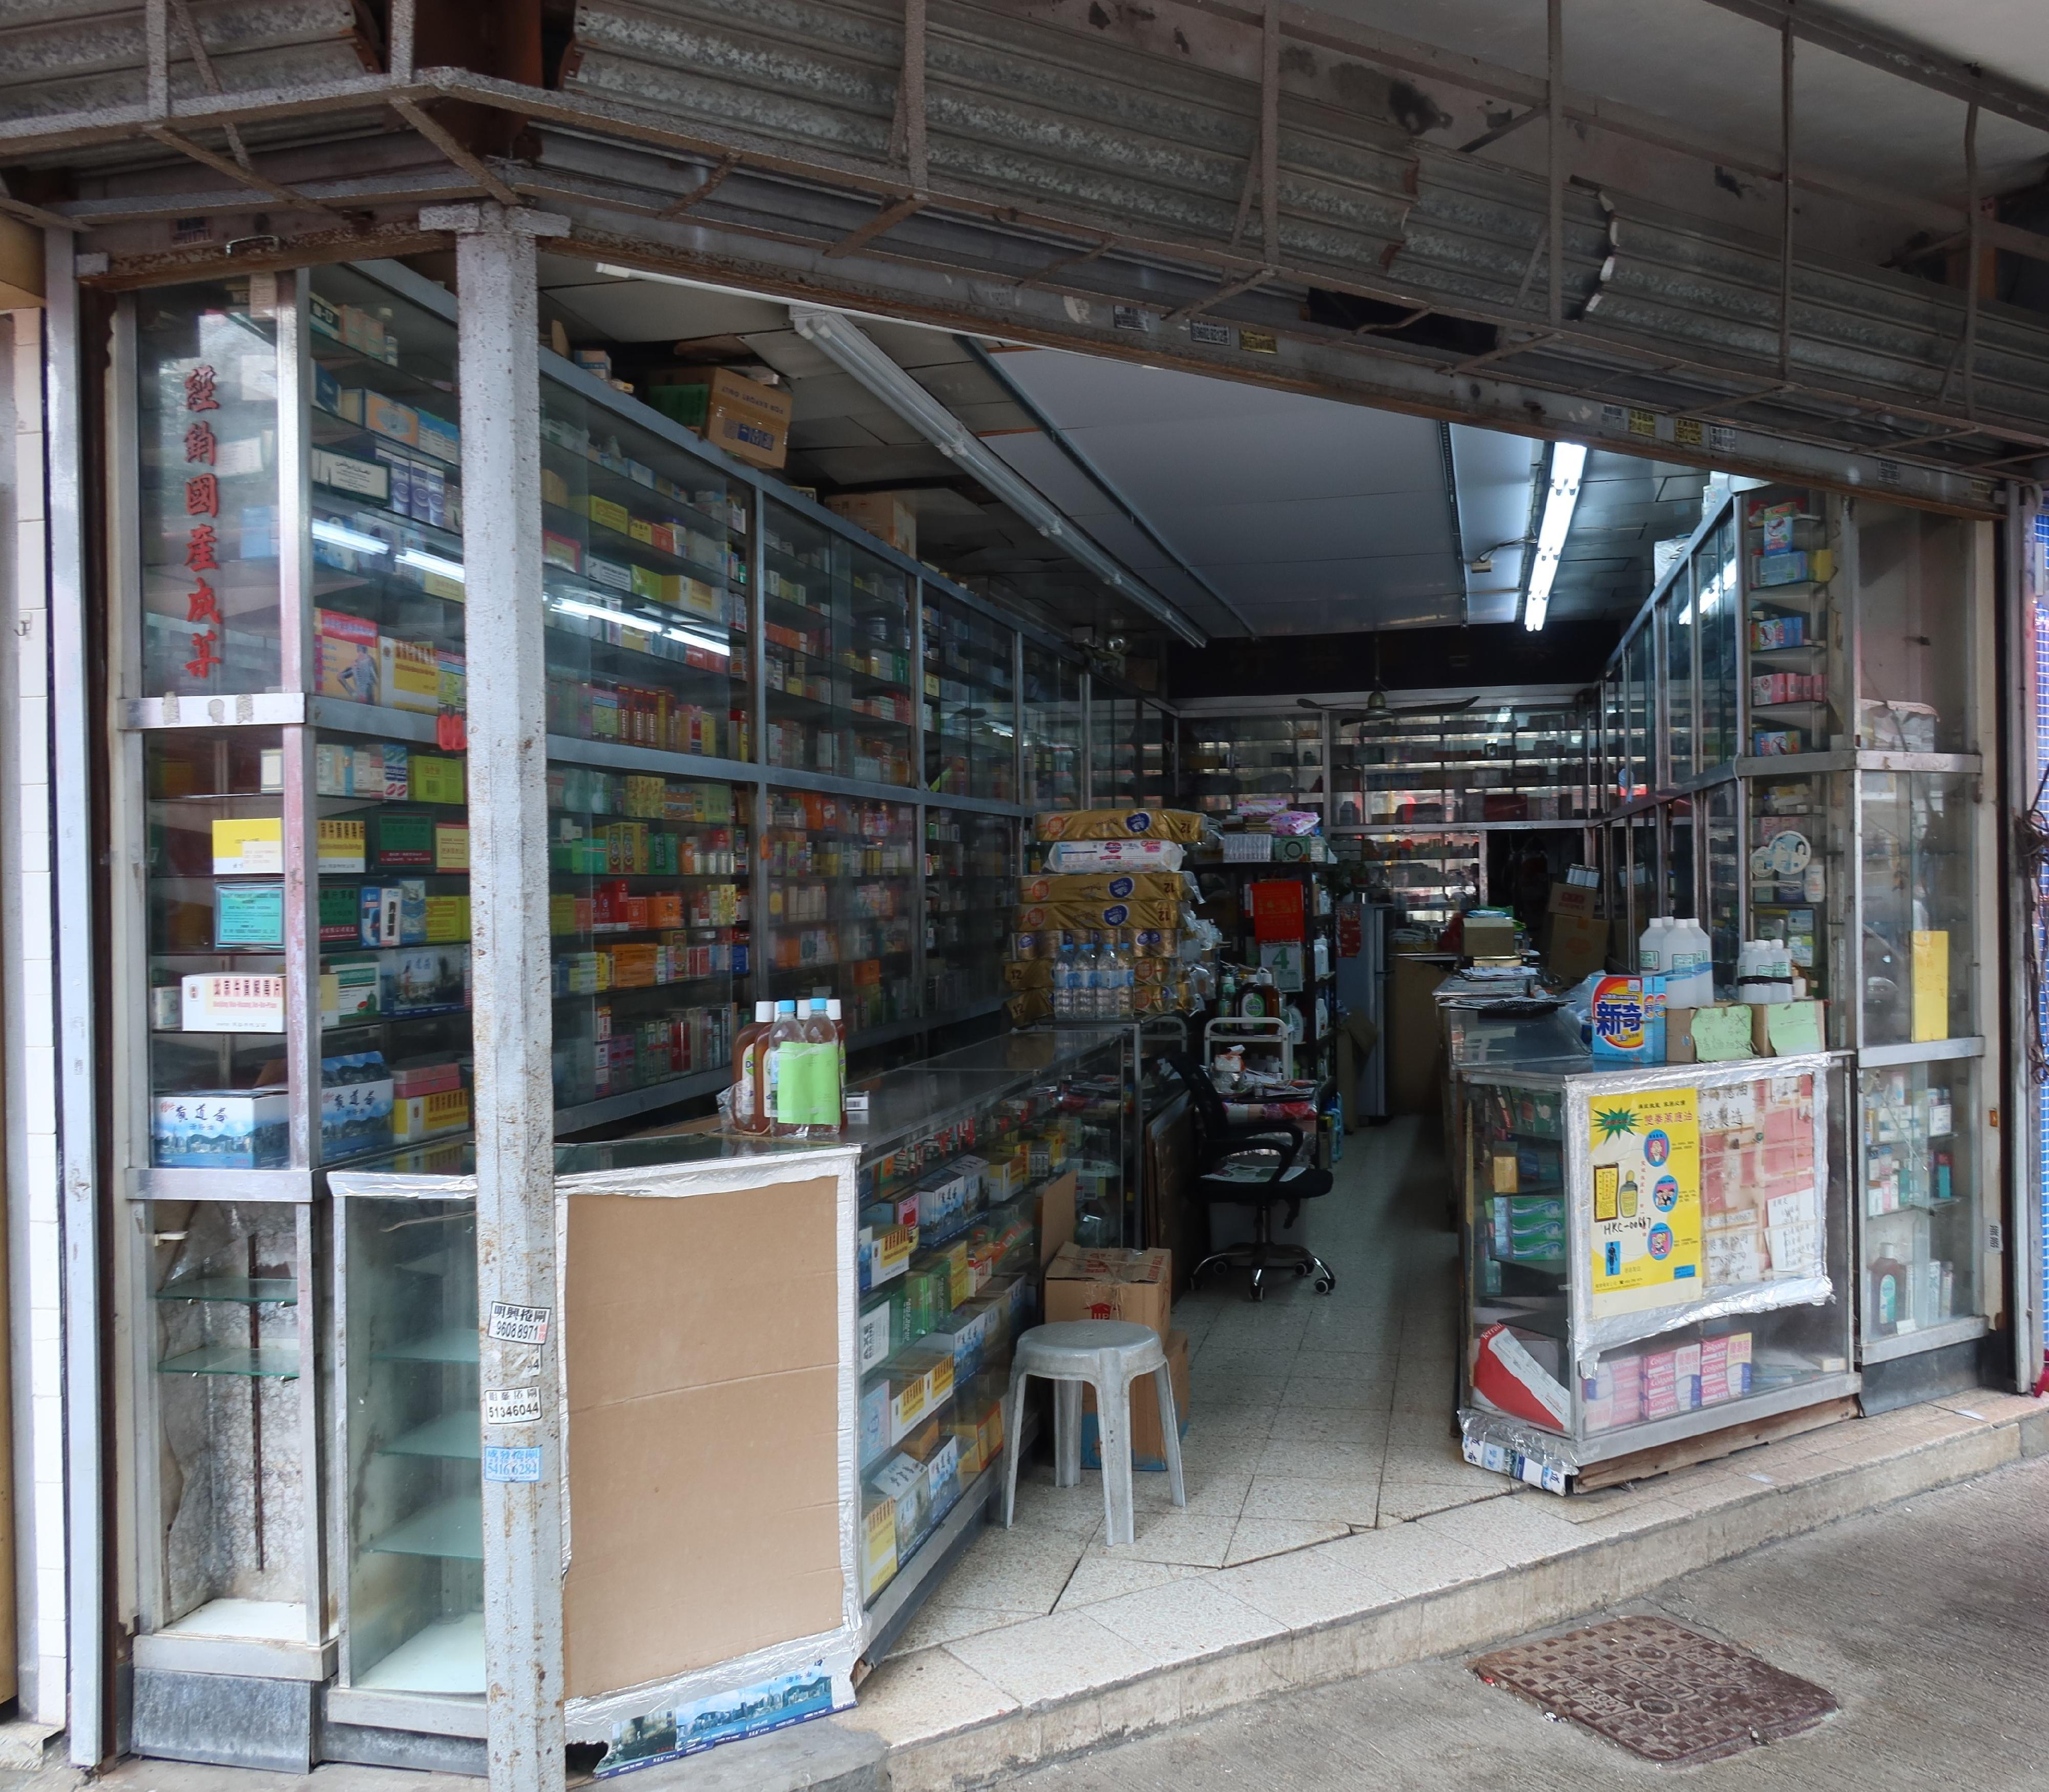 Hong Kong Customs conducted a special operation in Mong Kok and Fo Tan yesterday (June 4) to combat the sale of counterfeit goods and seized about 5 000 items of suspected counterfeit goods with an estimated market value of about $620,000. Photo shows one of the retail shops that sells suspected counterfeit goods raided by Customs officers.
